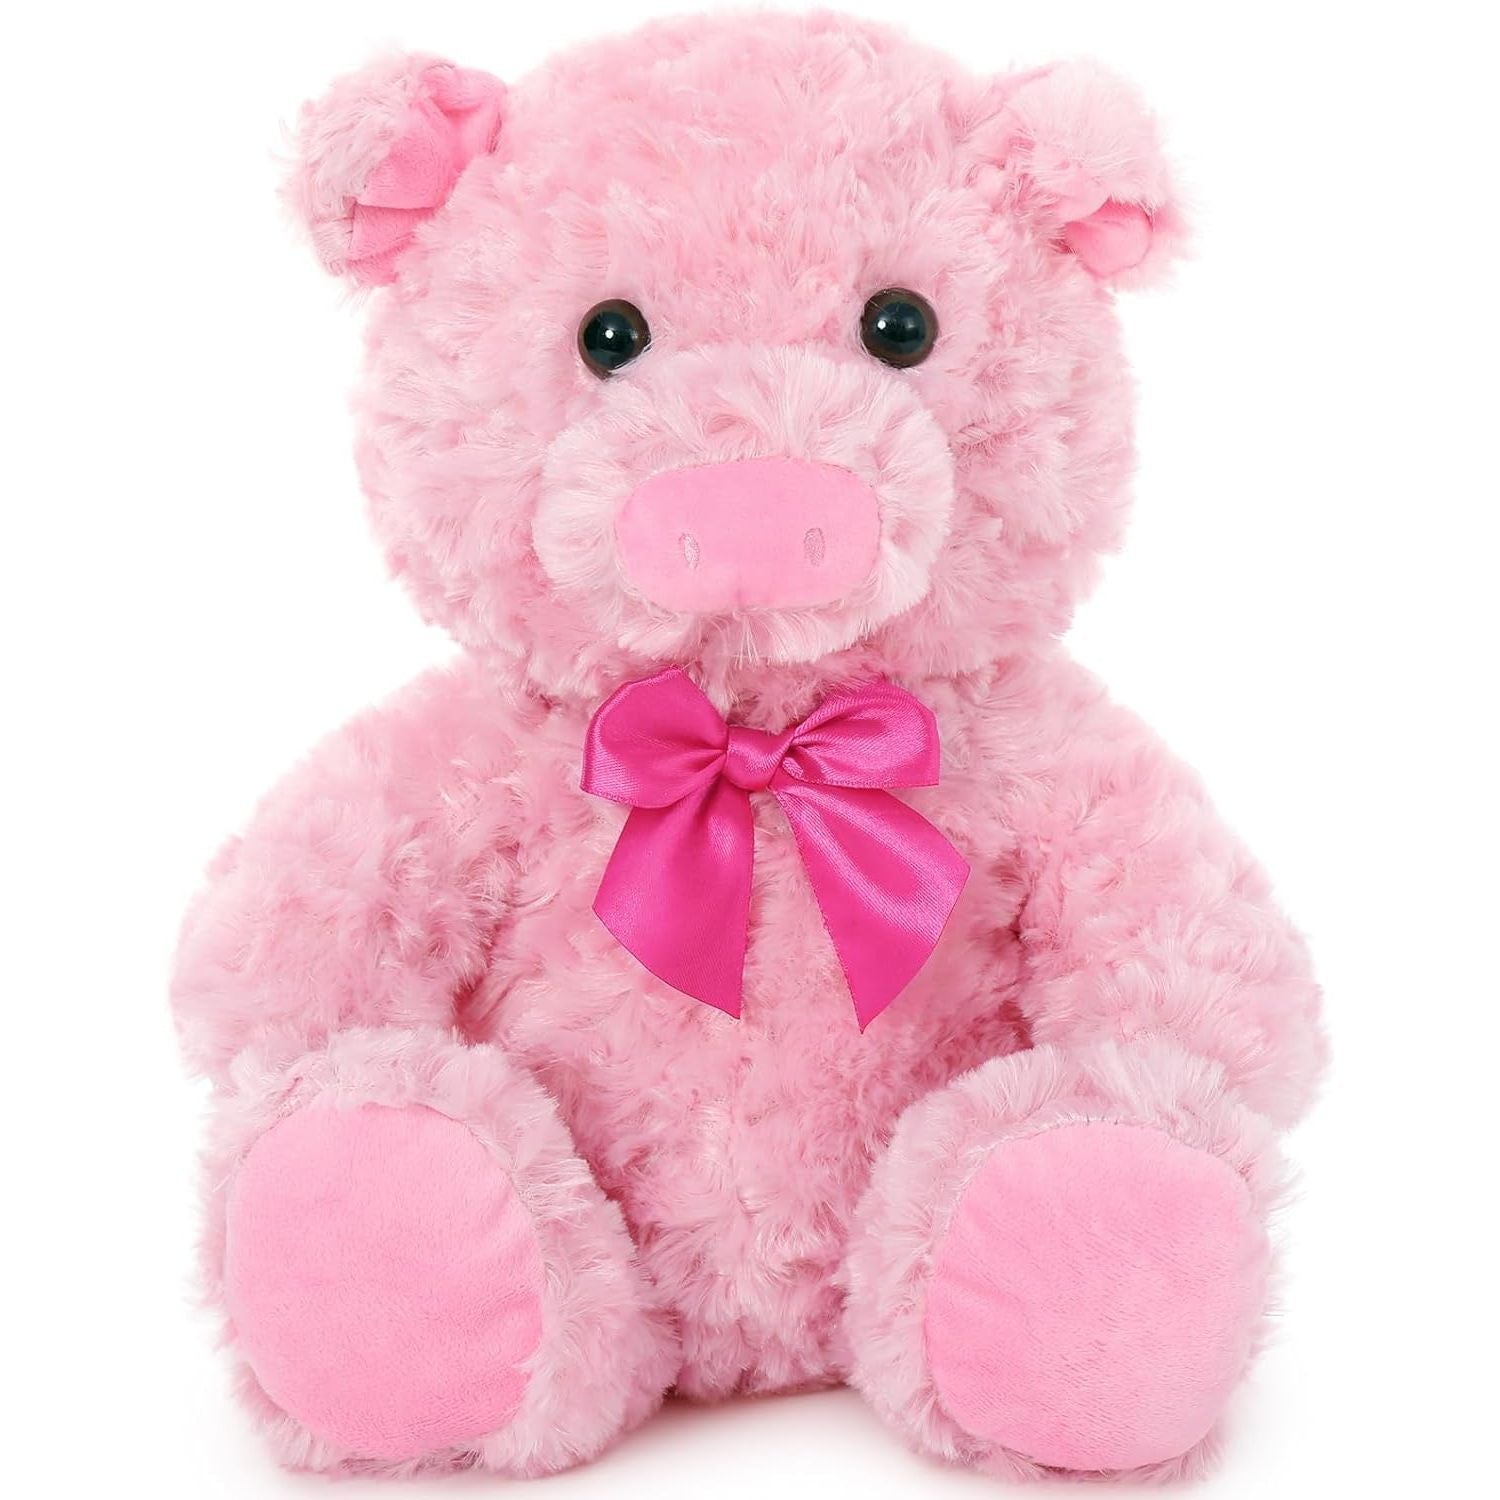 Cute Pig Plush Toy, Pink, 12 Inches